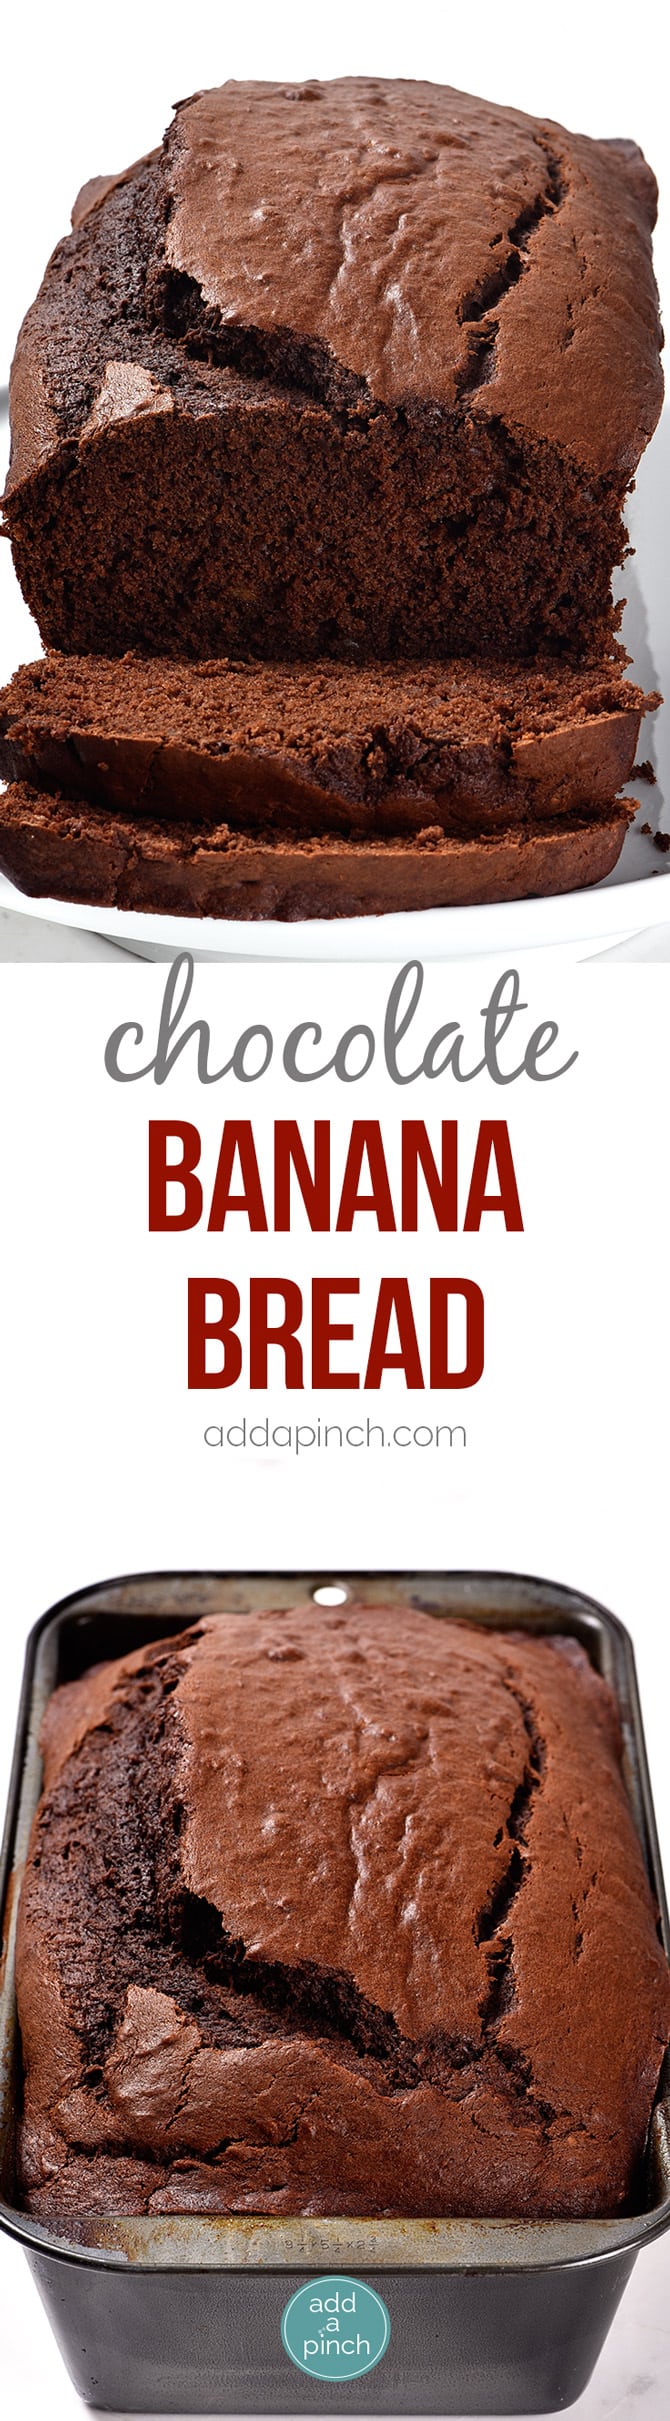 Chocolate Banana Bread Recipe - Take your banana bread to a whole new level with this incredibly most and delicious chocolate banana bread recipe! A definite family favorite! // addapinch.com